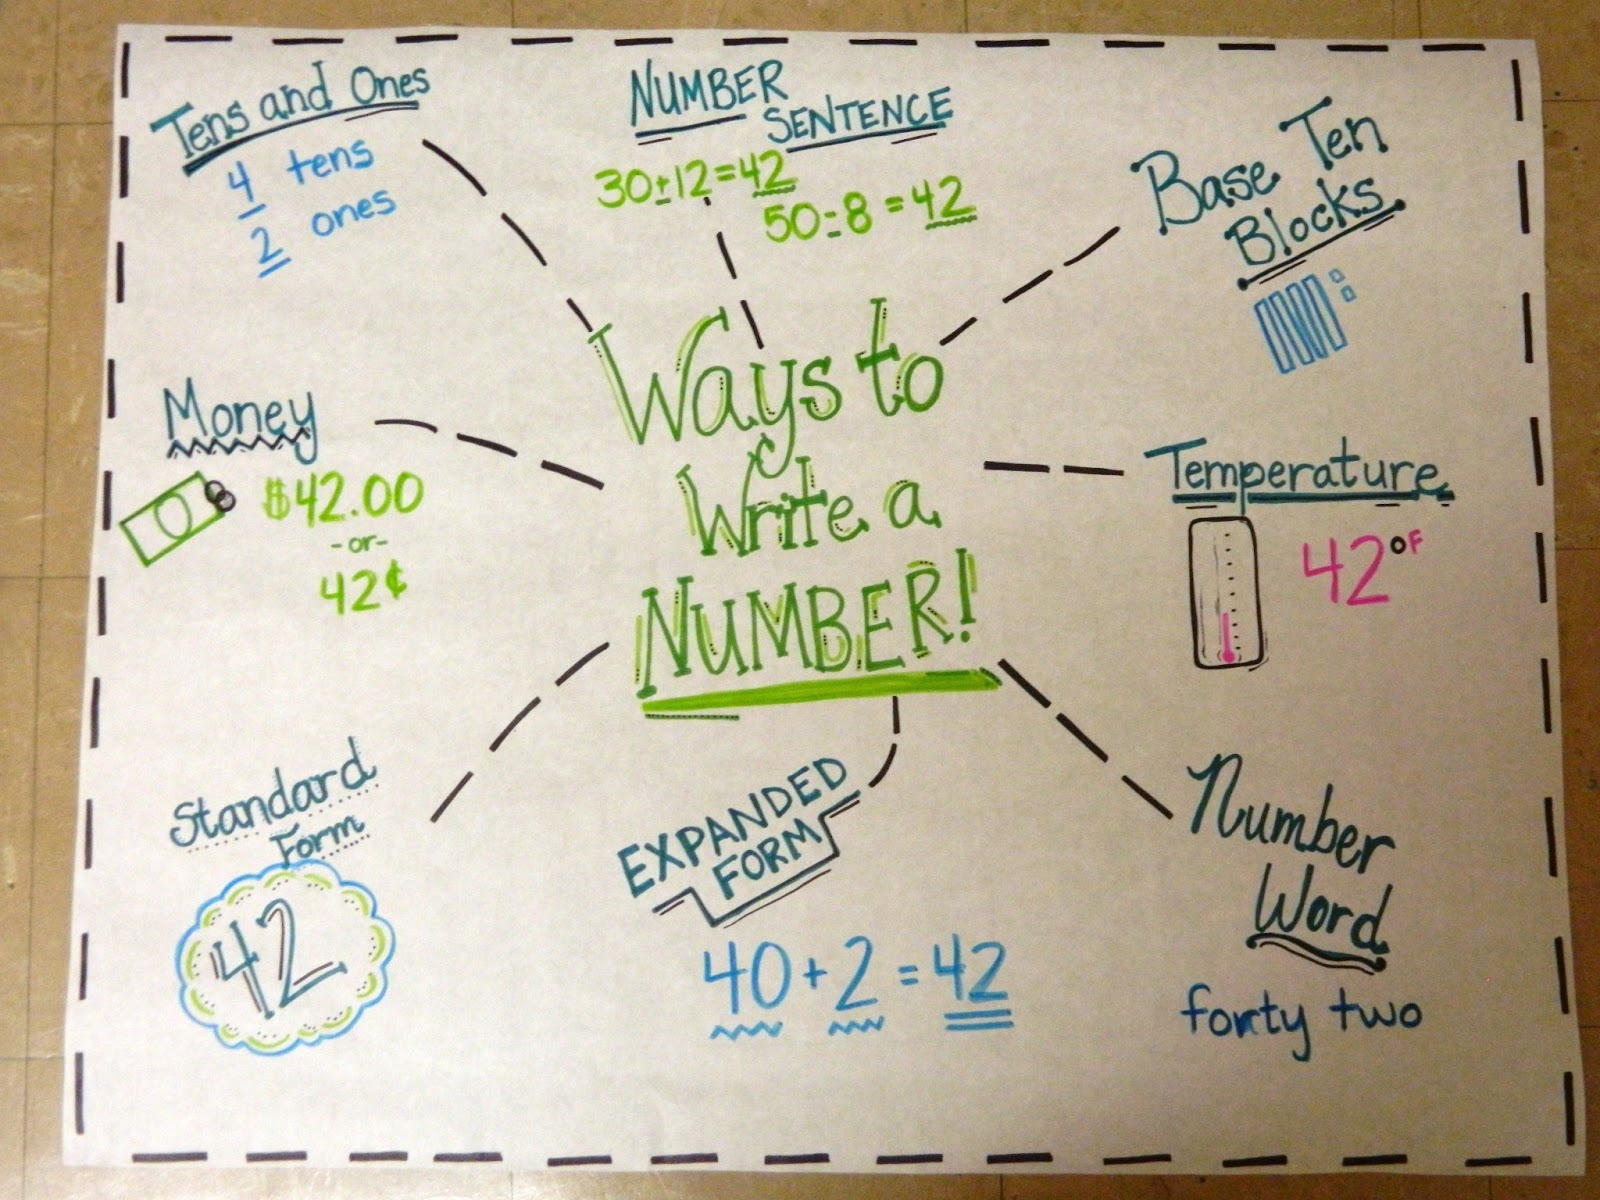 Place Value Anchor Chart